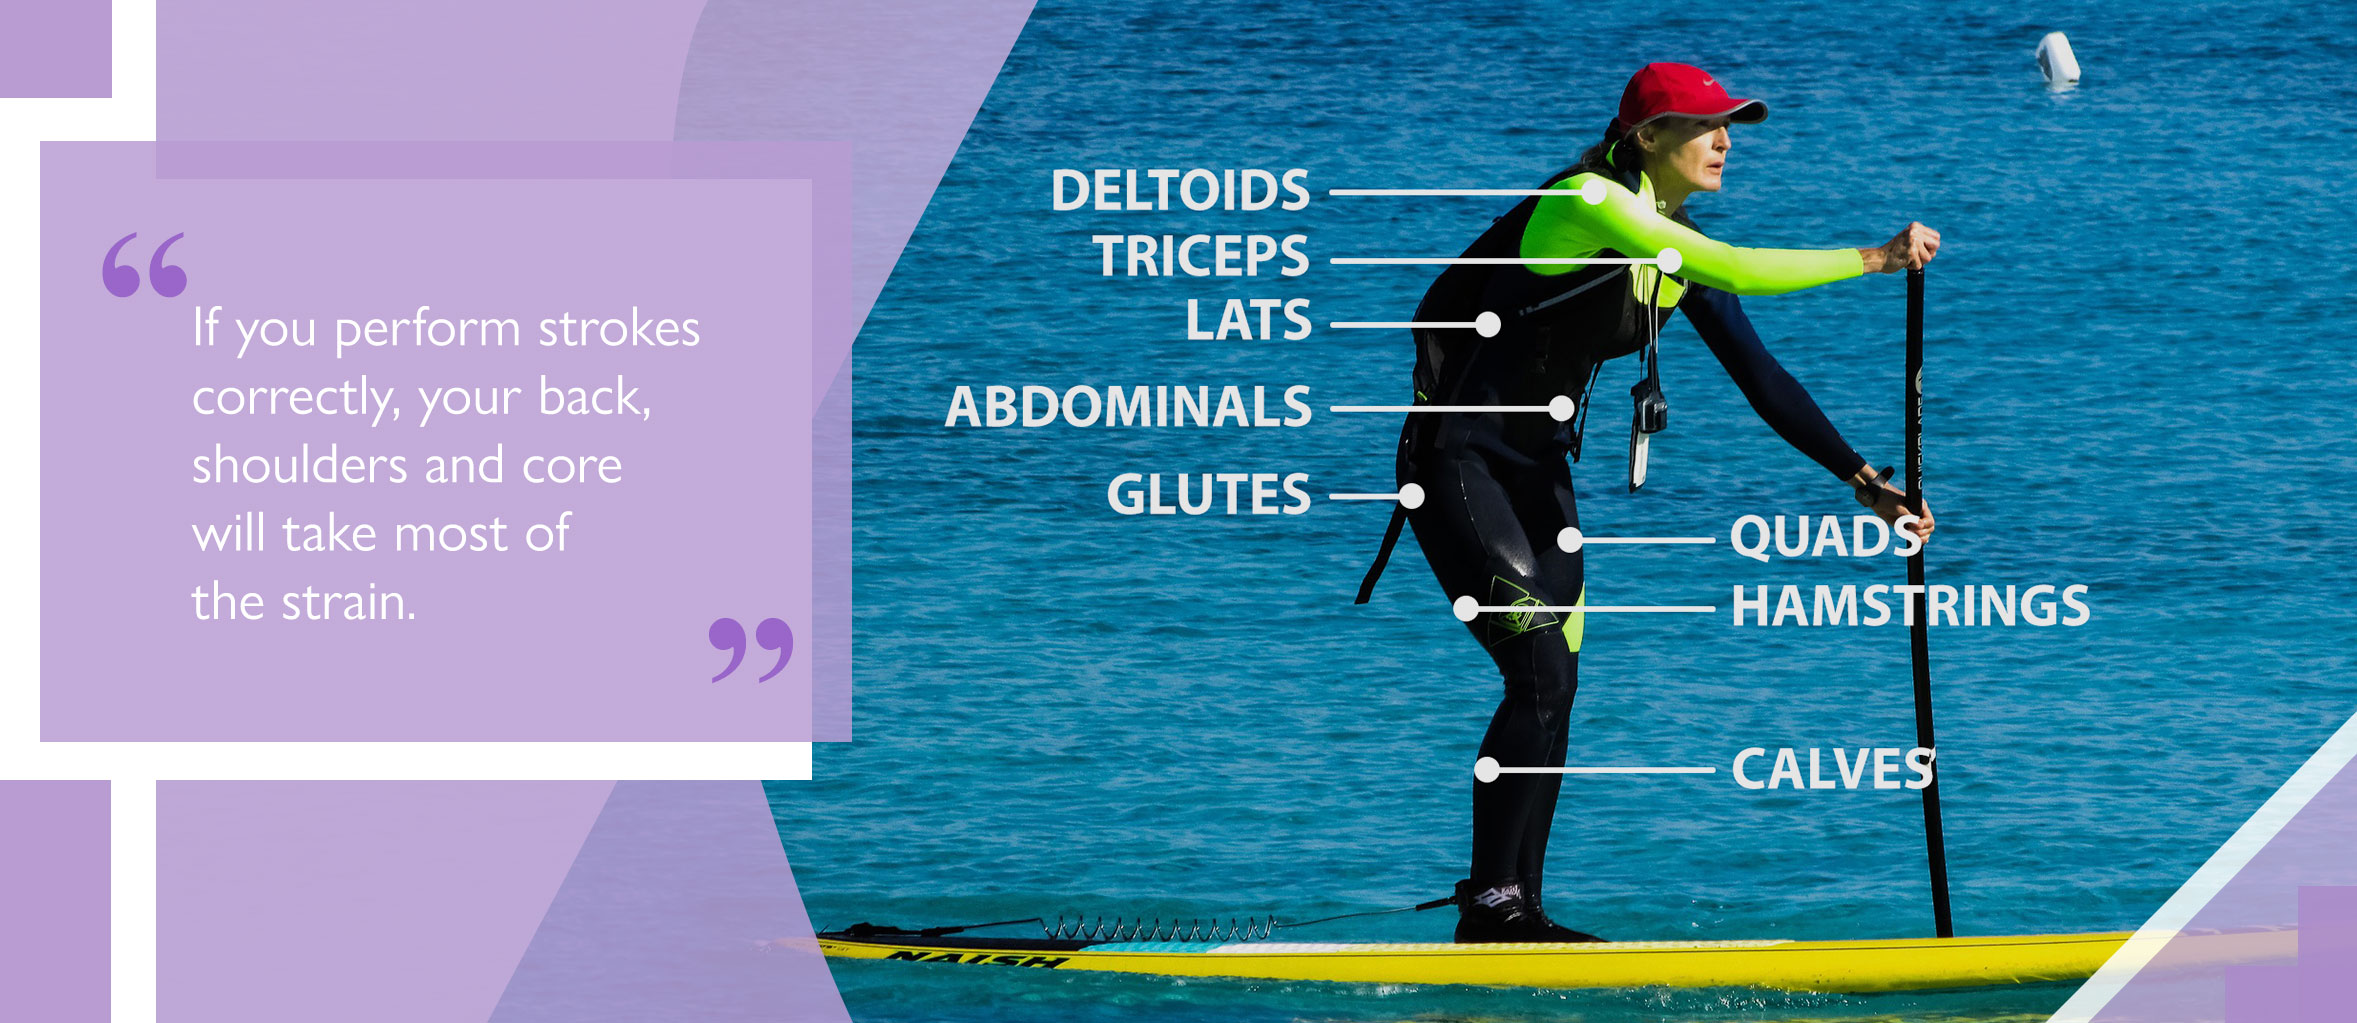 paddleboarding is good exercise infographic